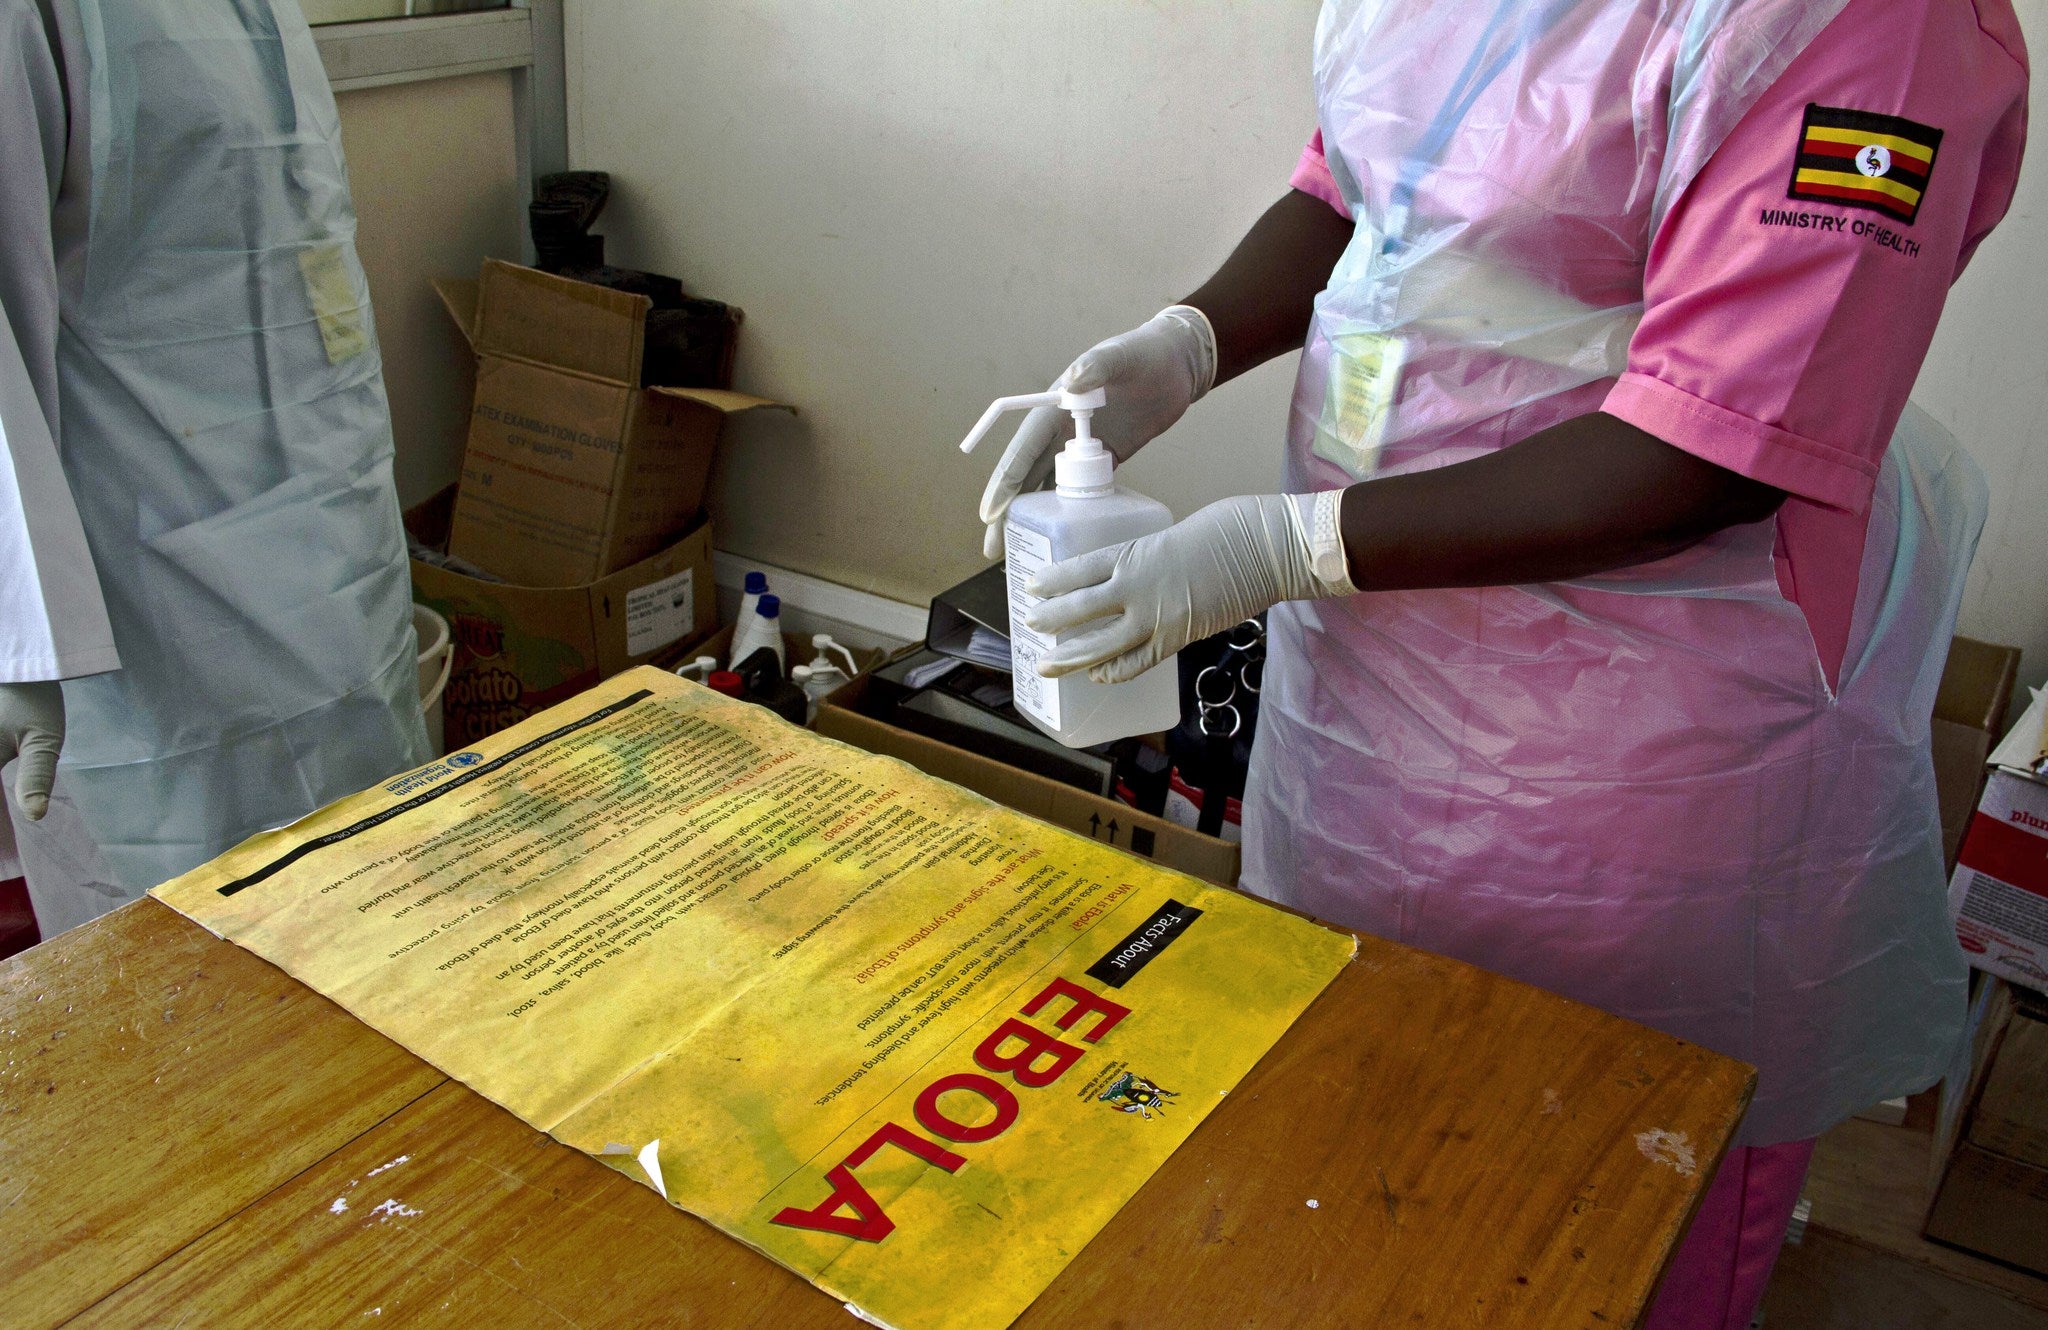 Ebola, which has swept through West Africa killing nearly 1,000, could have a vaccine by 2015